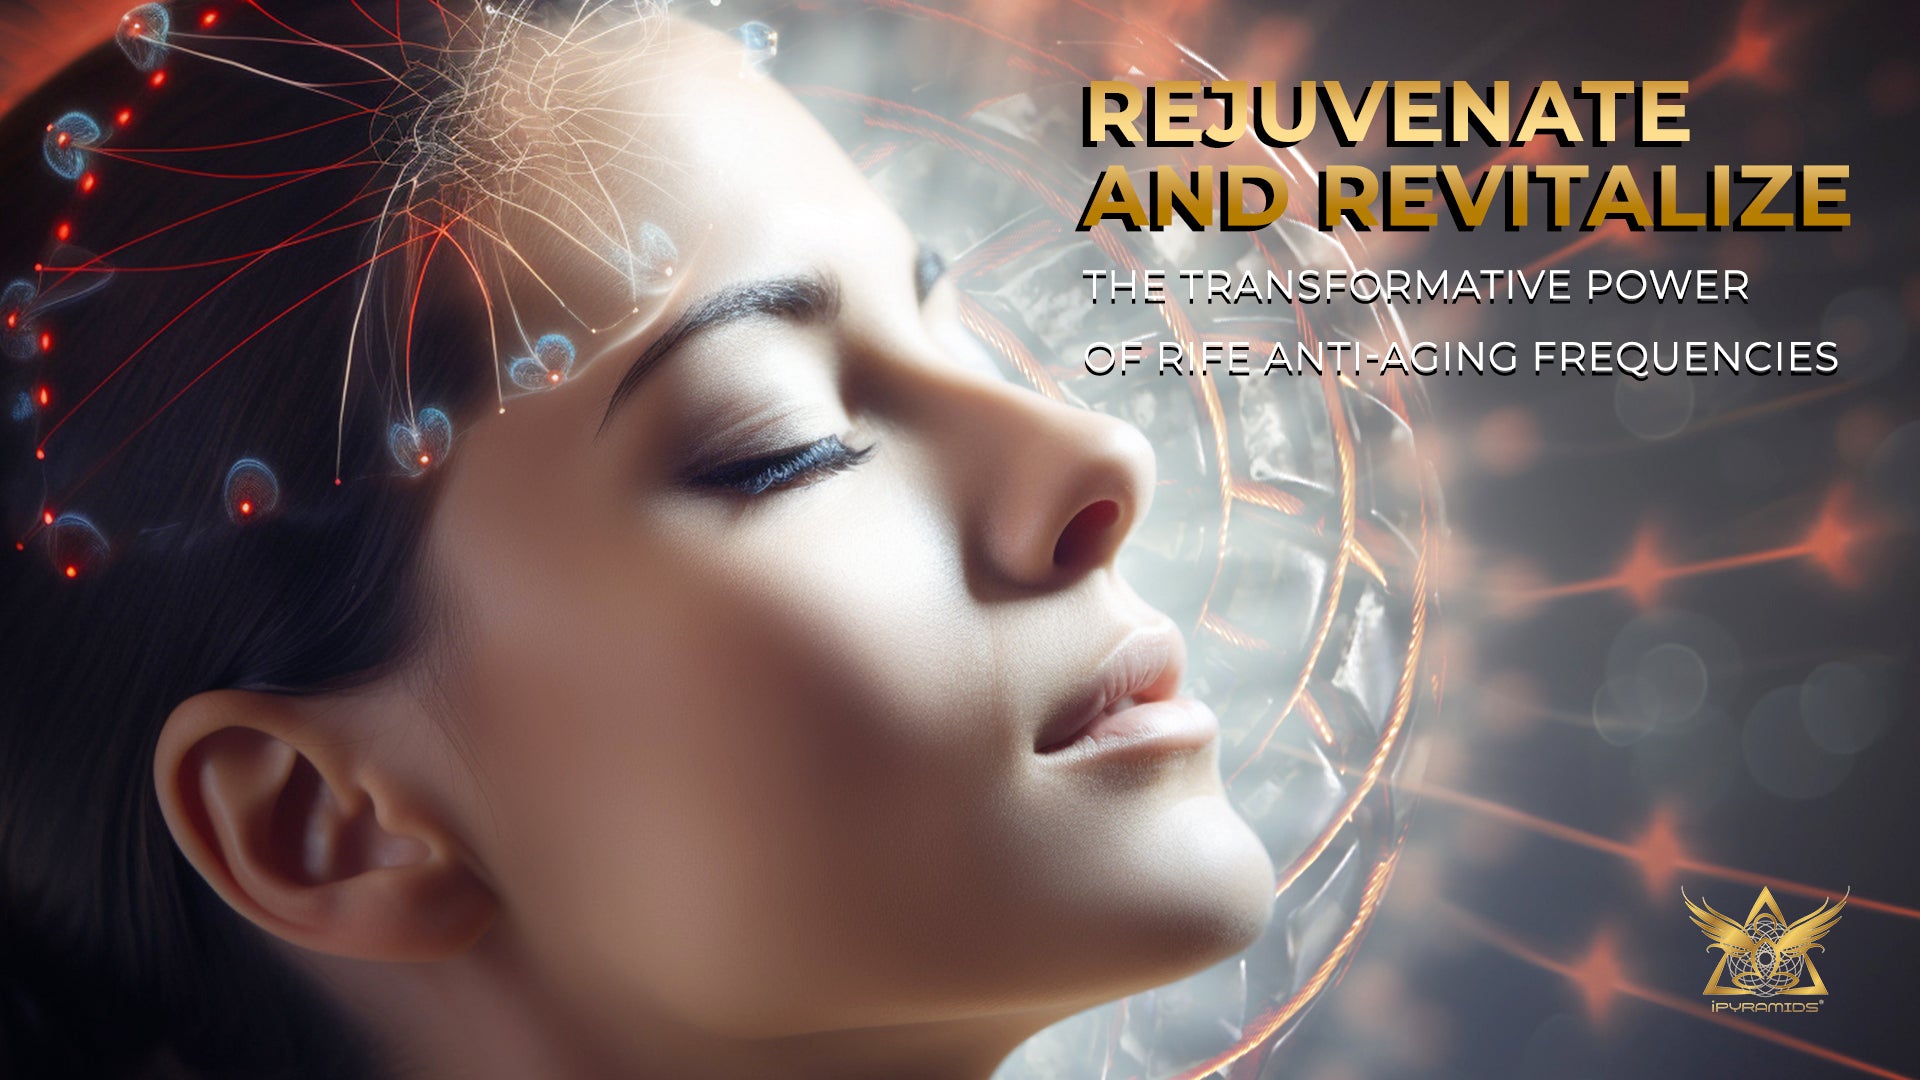 Rejuvenate and Revitalize: The Transformative Power of RIFE Anti-Aging Frequencies